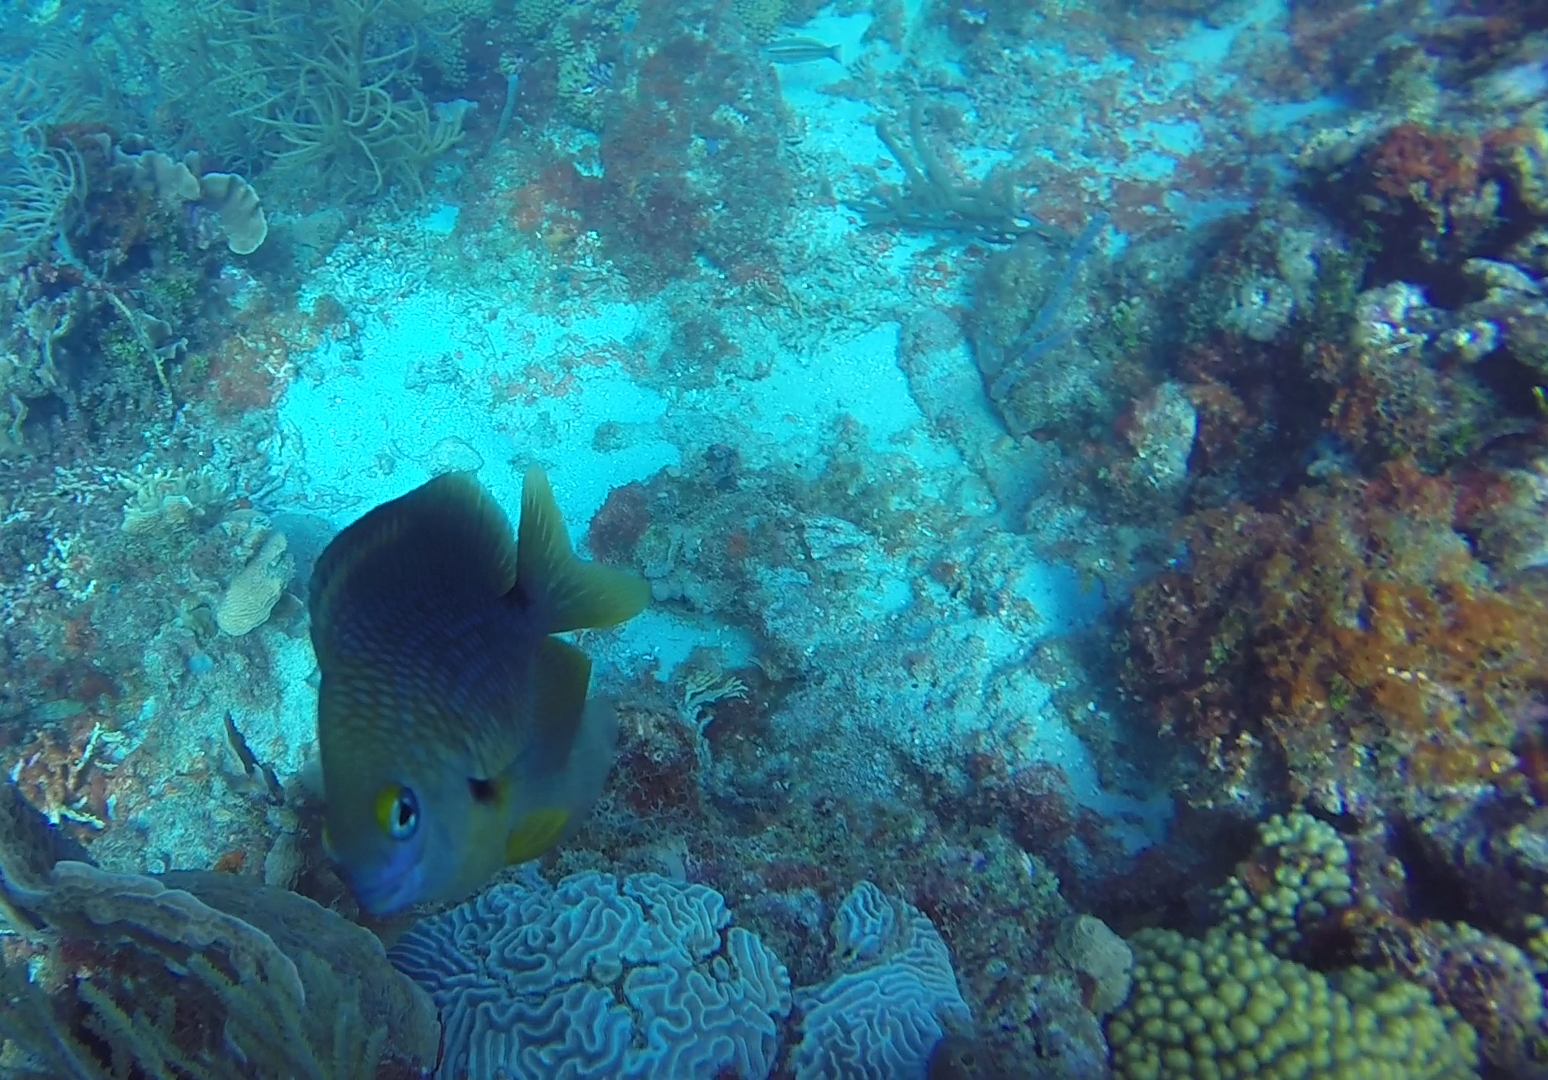 This little guy got curious of the big, noisy, clumsy thing in the water.